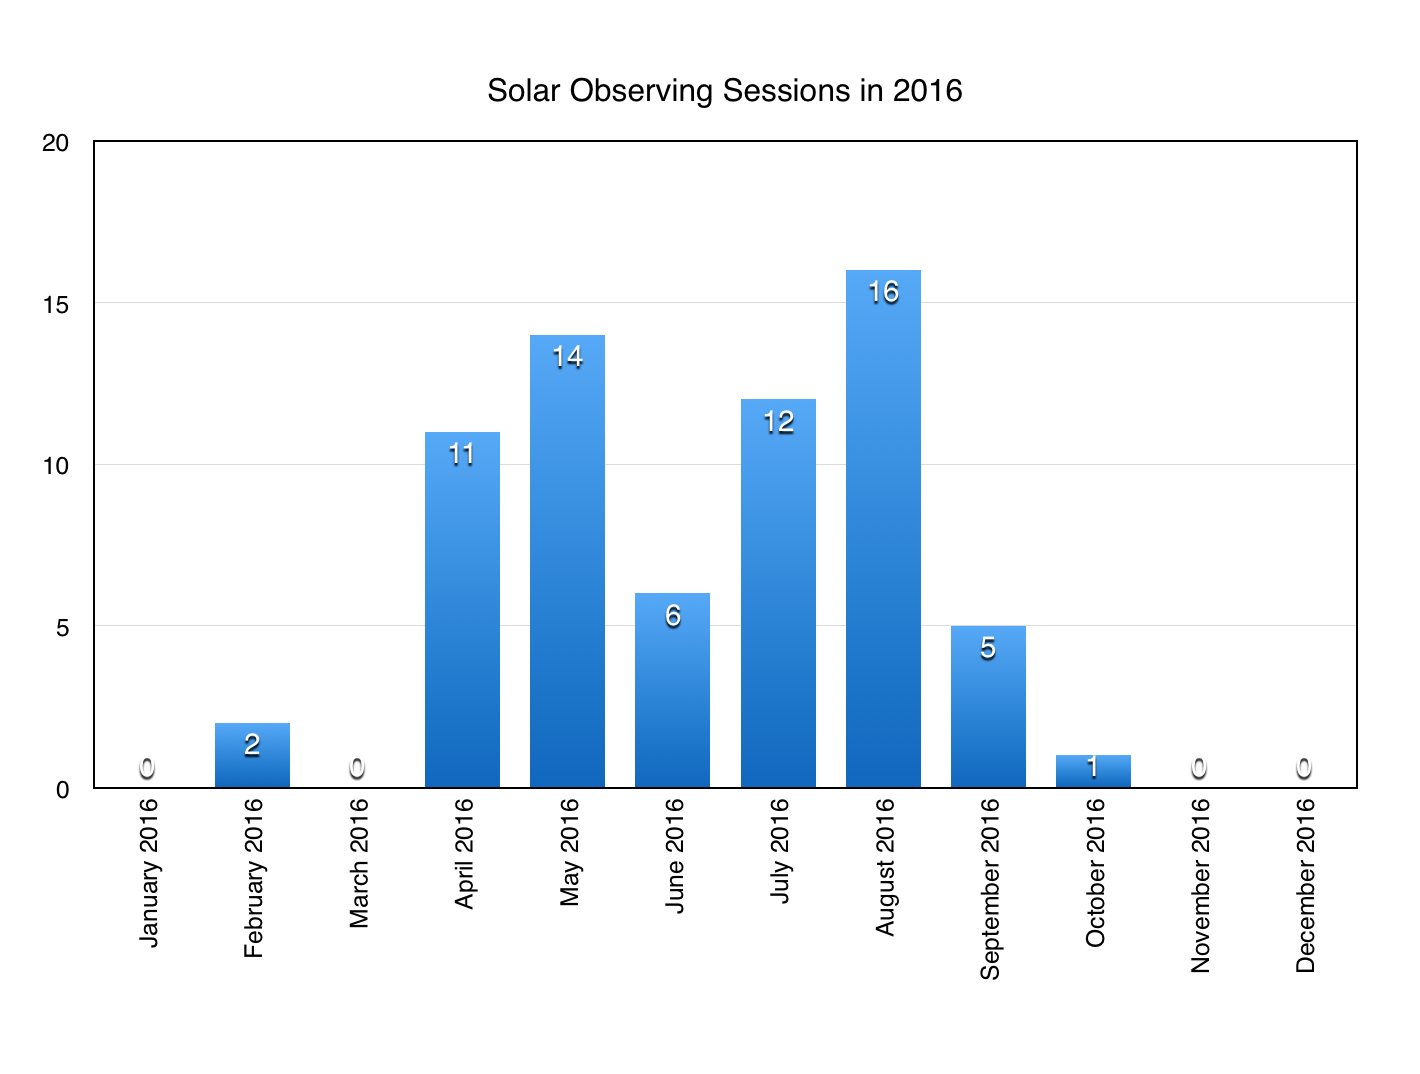 My Solar observing record for 2016